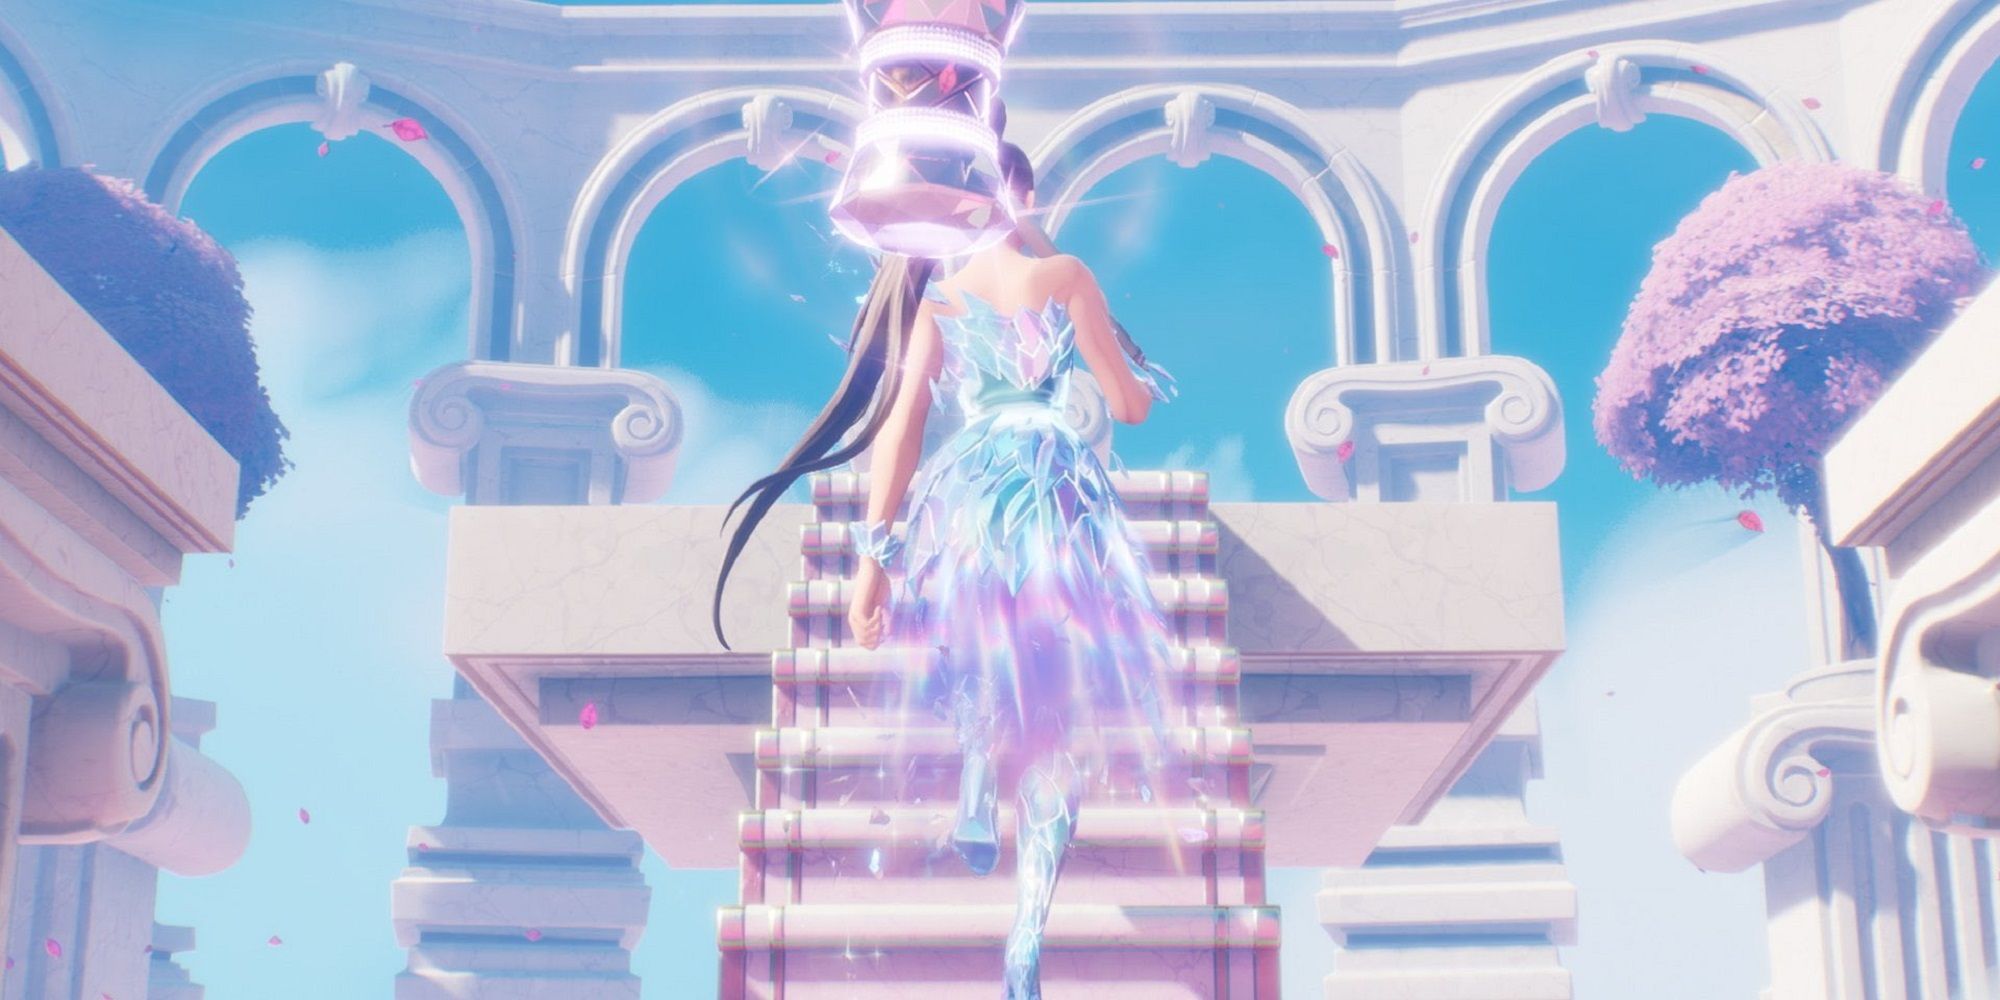 Ariana Grande ascending the stairs in Fortnite